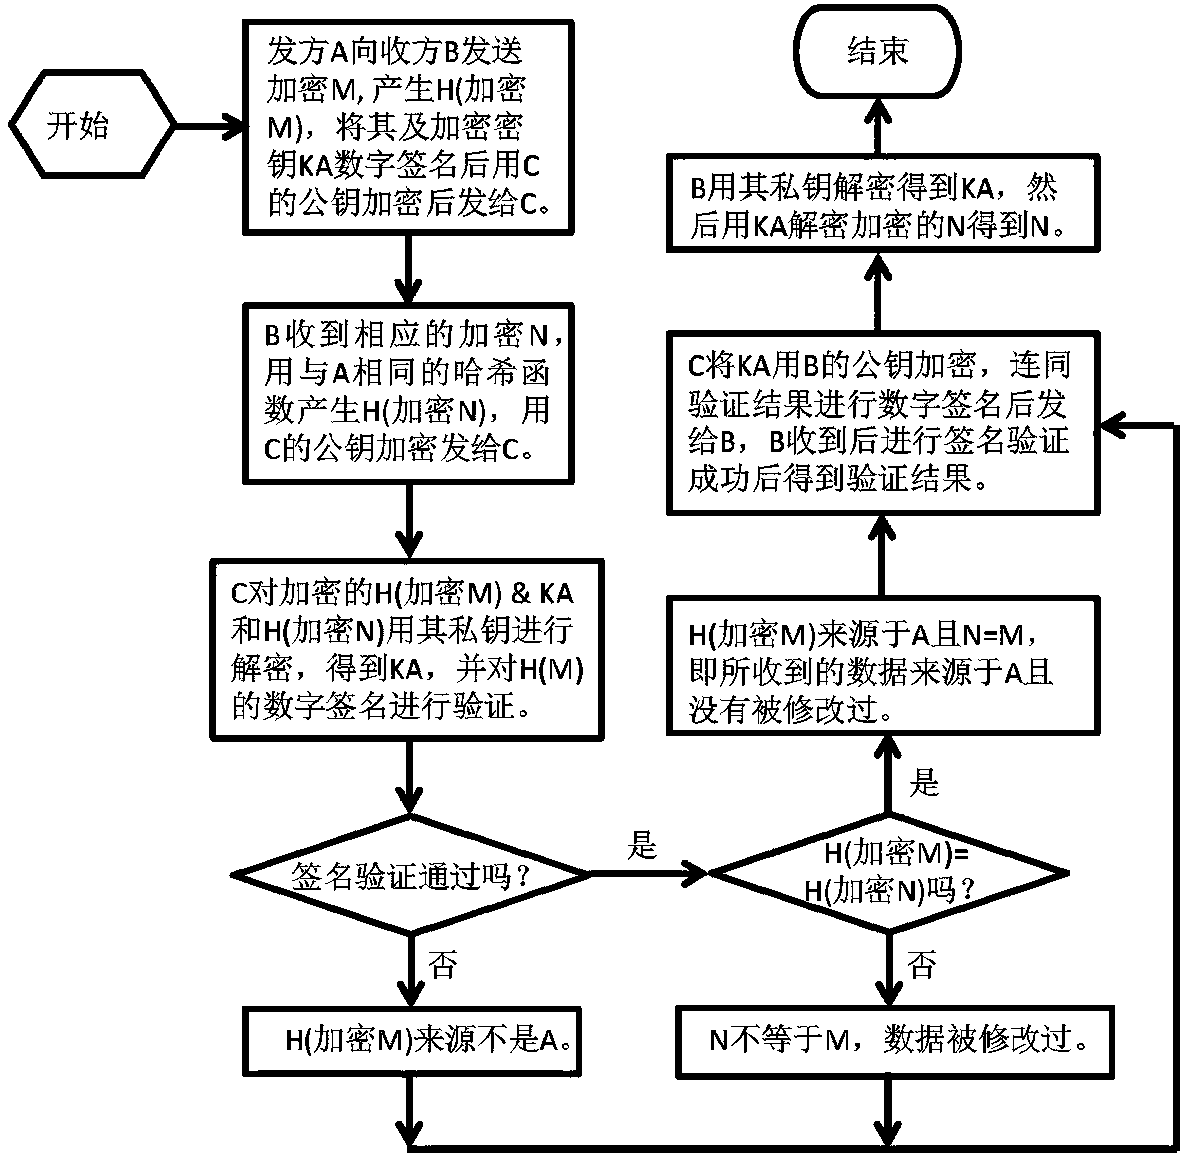 Third-party-based verified information non-leakage data integrity and source verification method